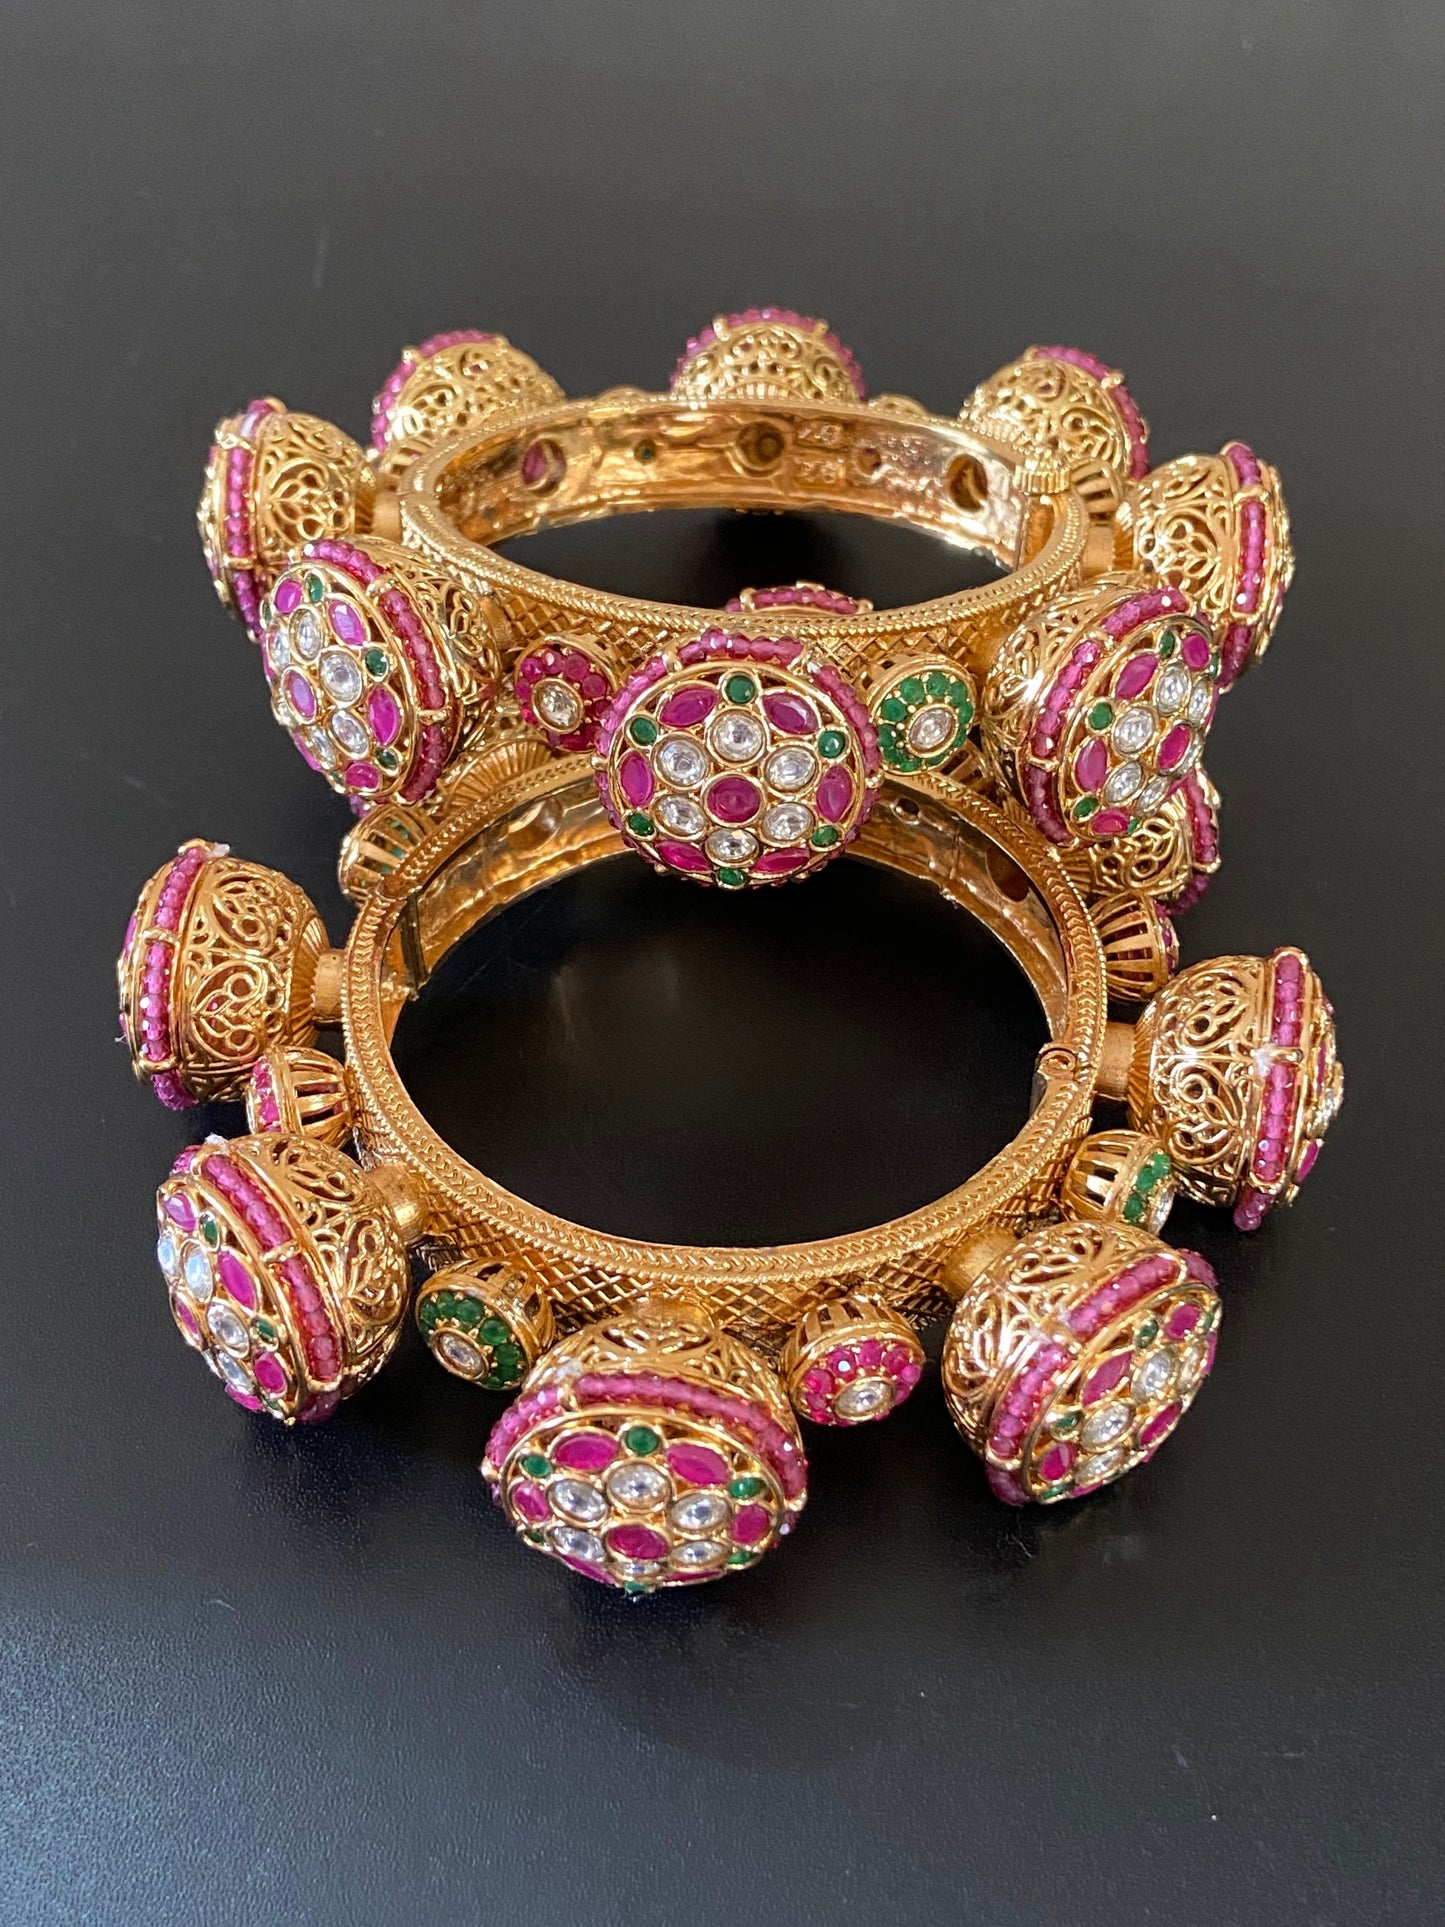 Openable antique bangles | Indian jewelry in USA